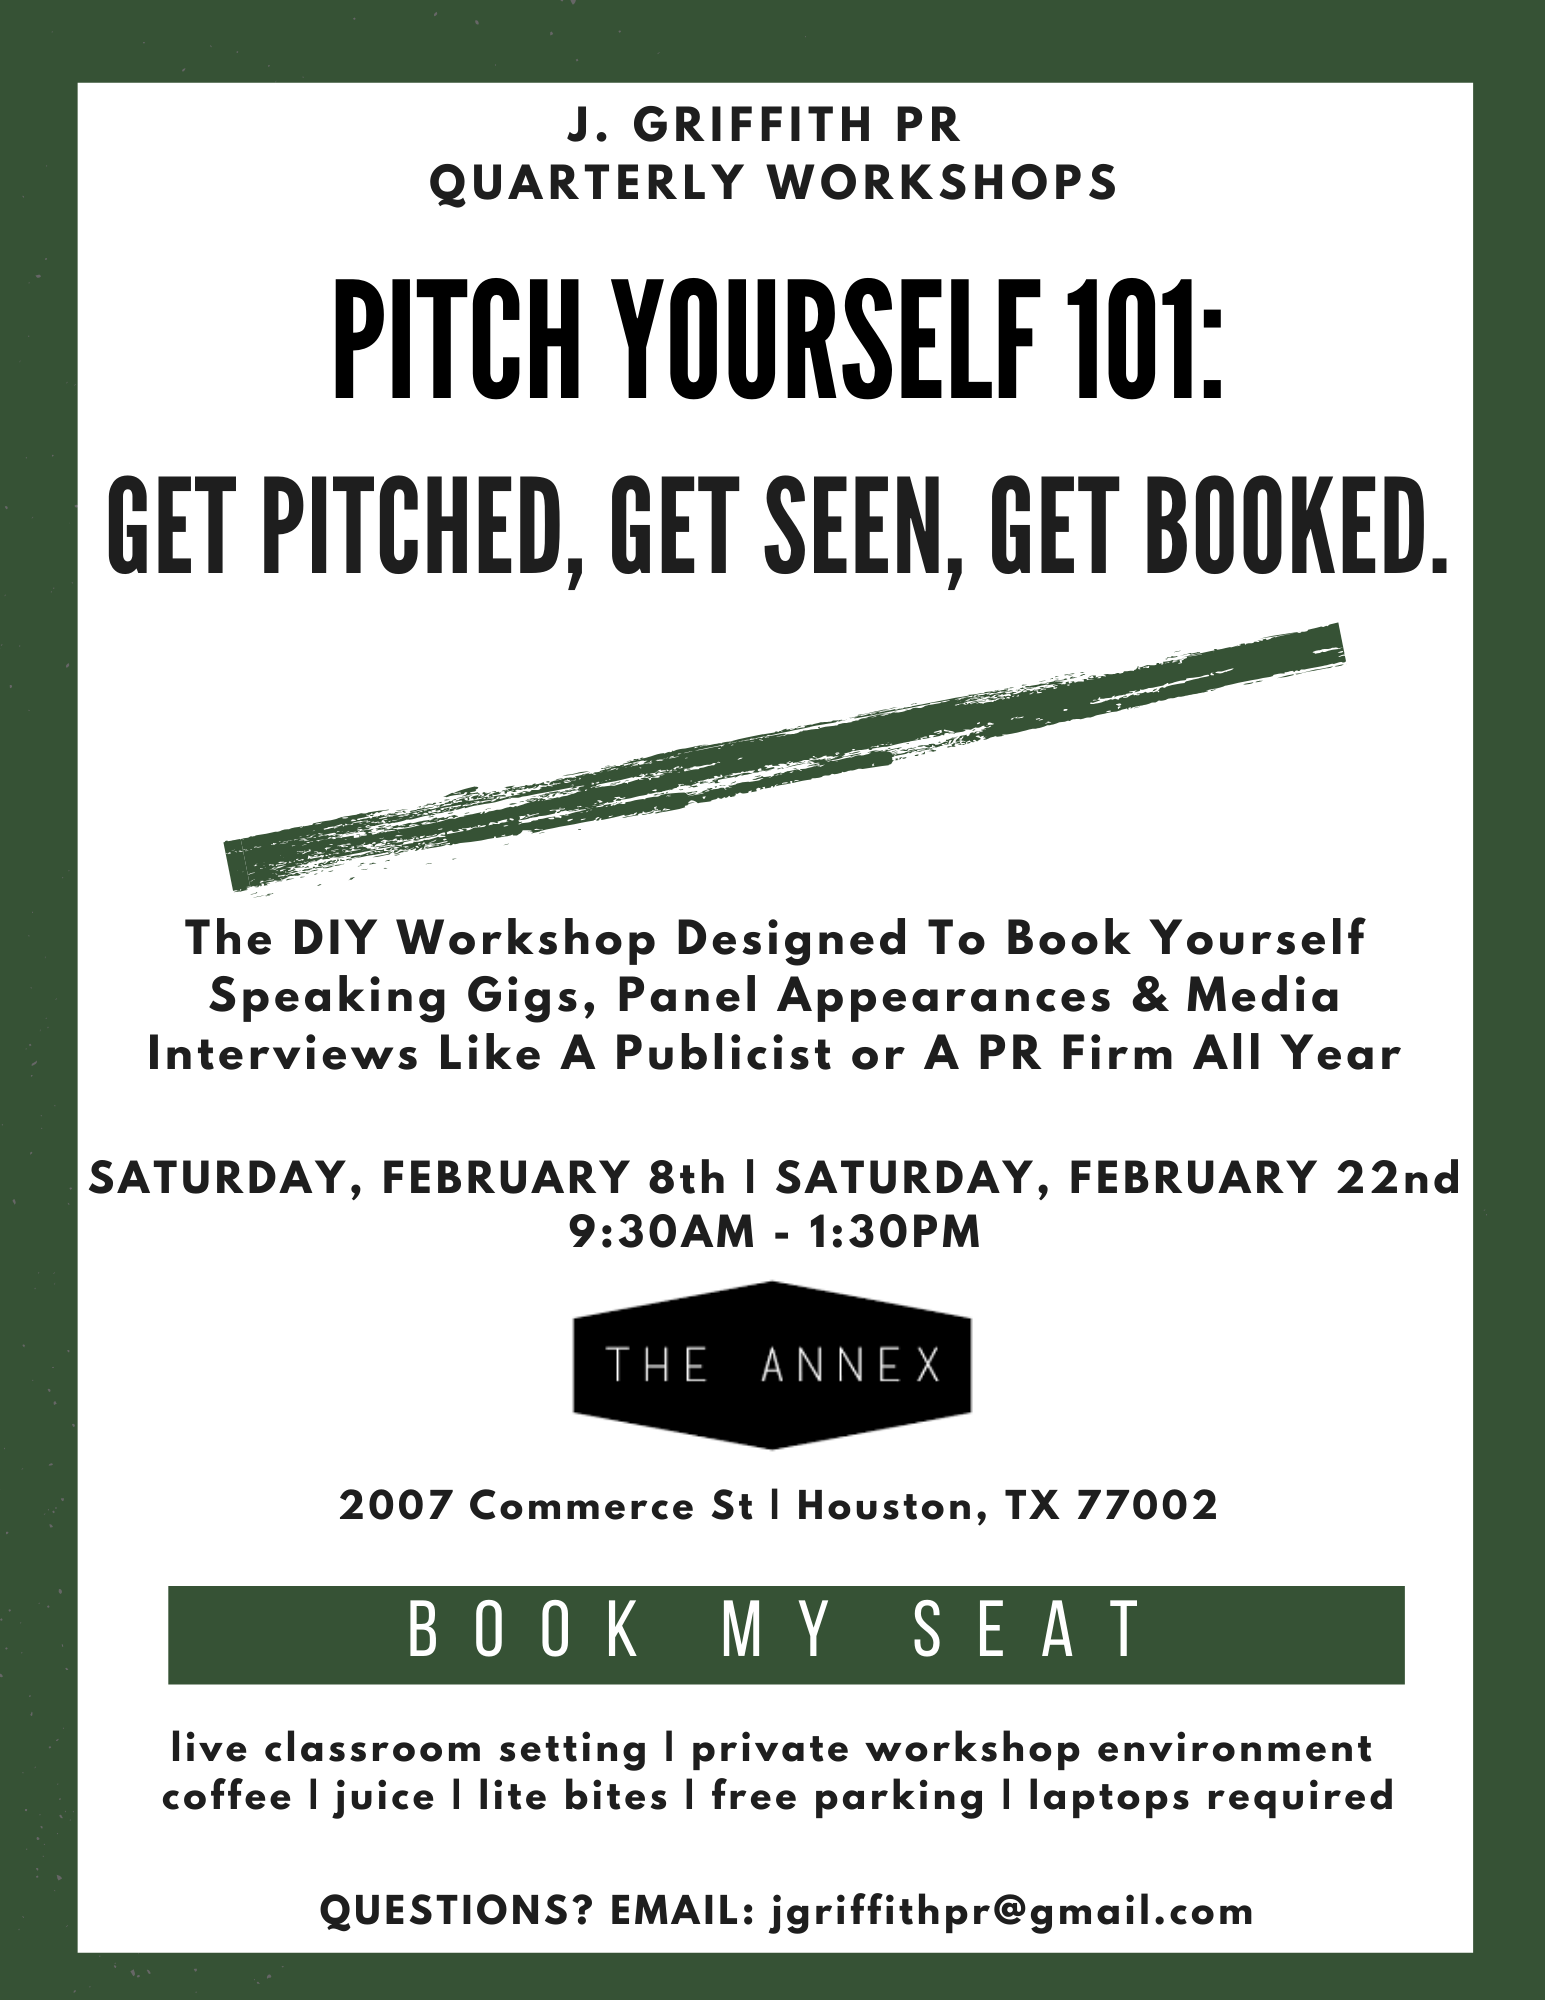 J.Griffith PR Quarterly Workshops: PITCHED 101! Get Noticed, Seen & Booked!